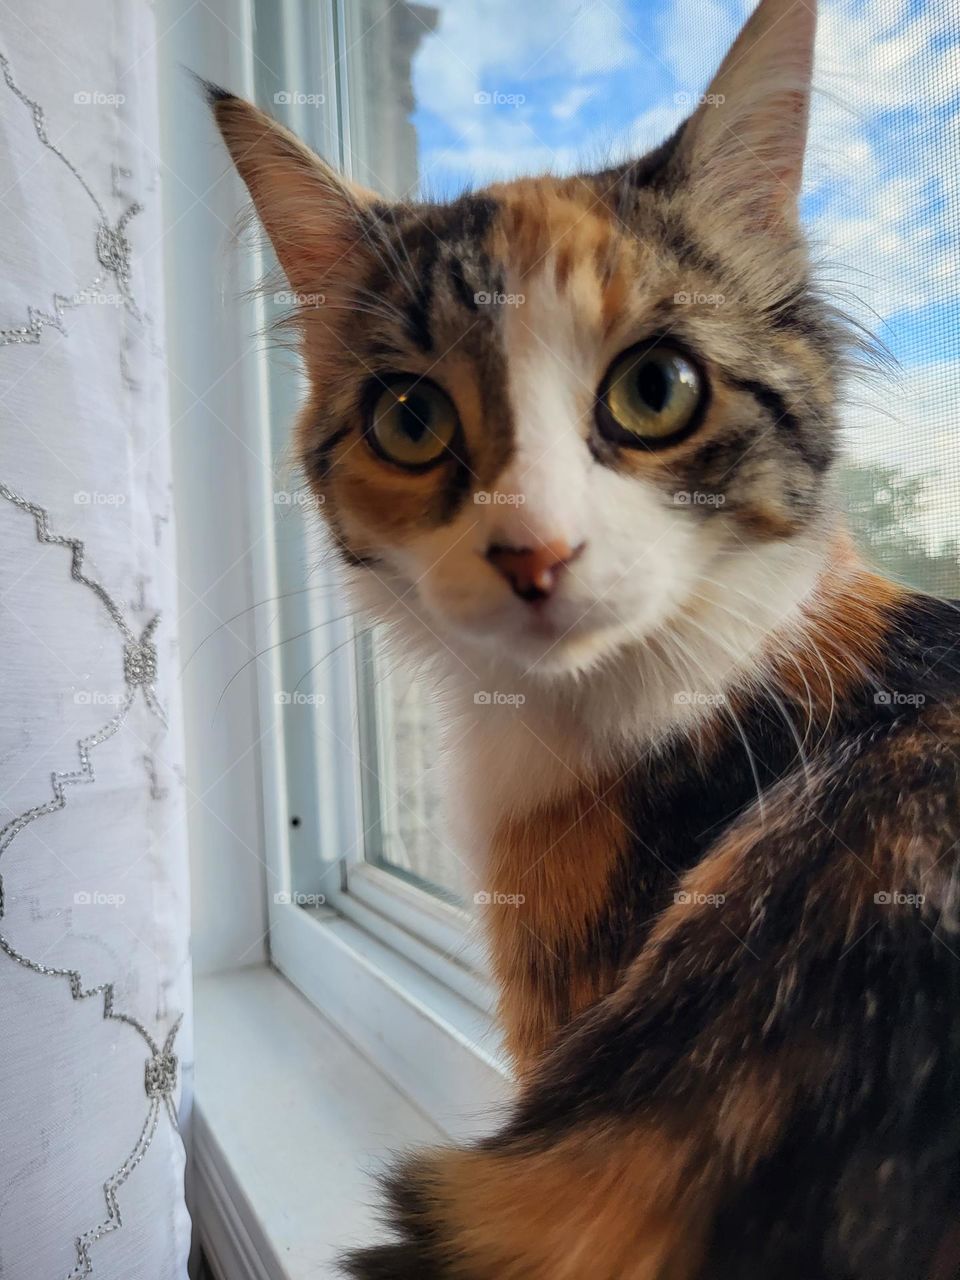 Calico cat sitting in widow looking at the camera